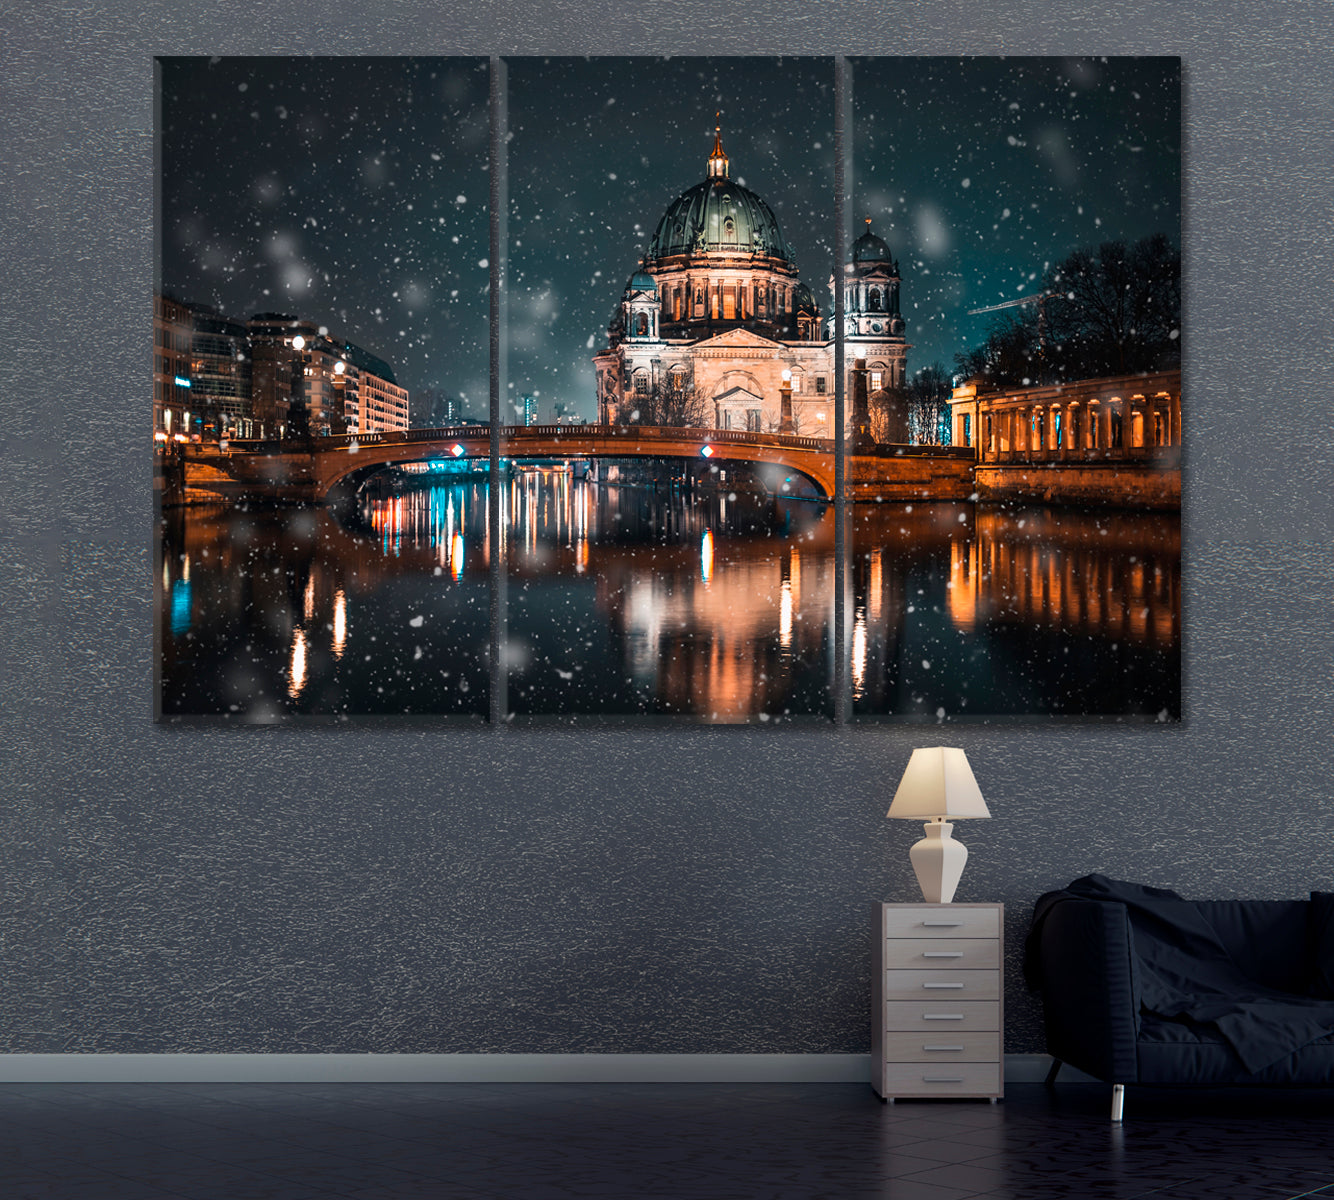 Berlin Cathedral on Spree River Canvas Print ArtLexy 3 Panels 36"x24" inches 